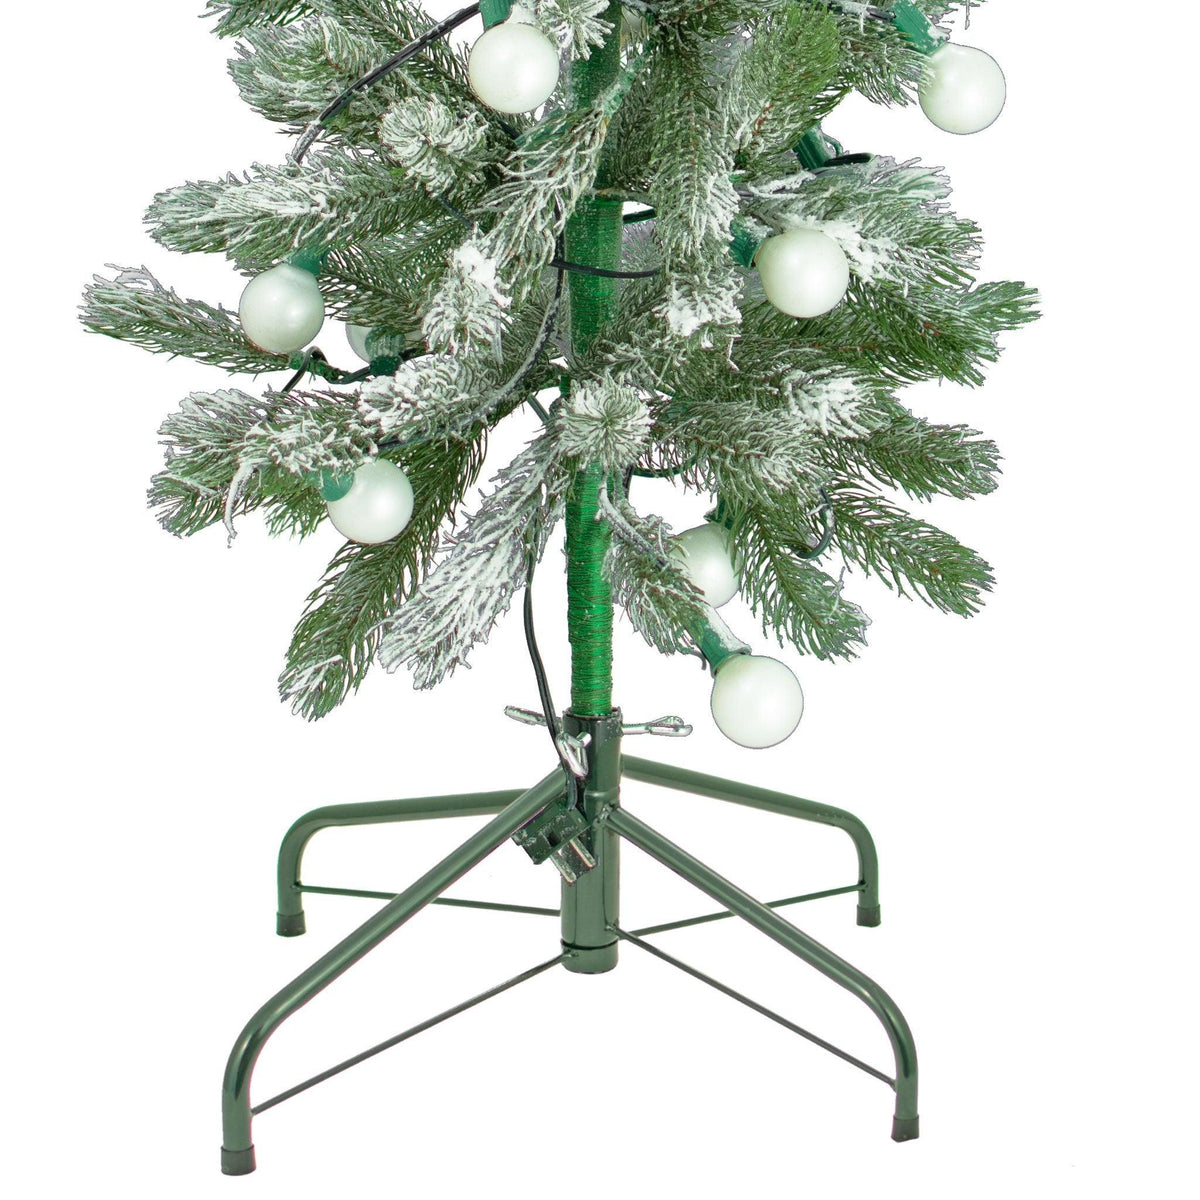 Lee Display's brand new Aspen Pine Christmas Trees are flocked with artificial white snow and lit with solid White G40 Lights.  Shop now at leedisplay.com